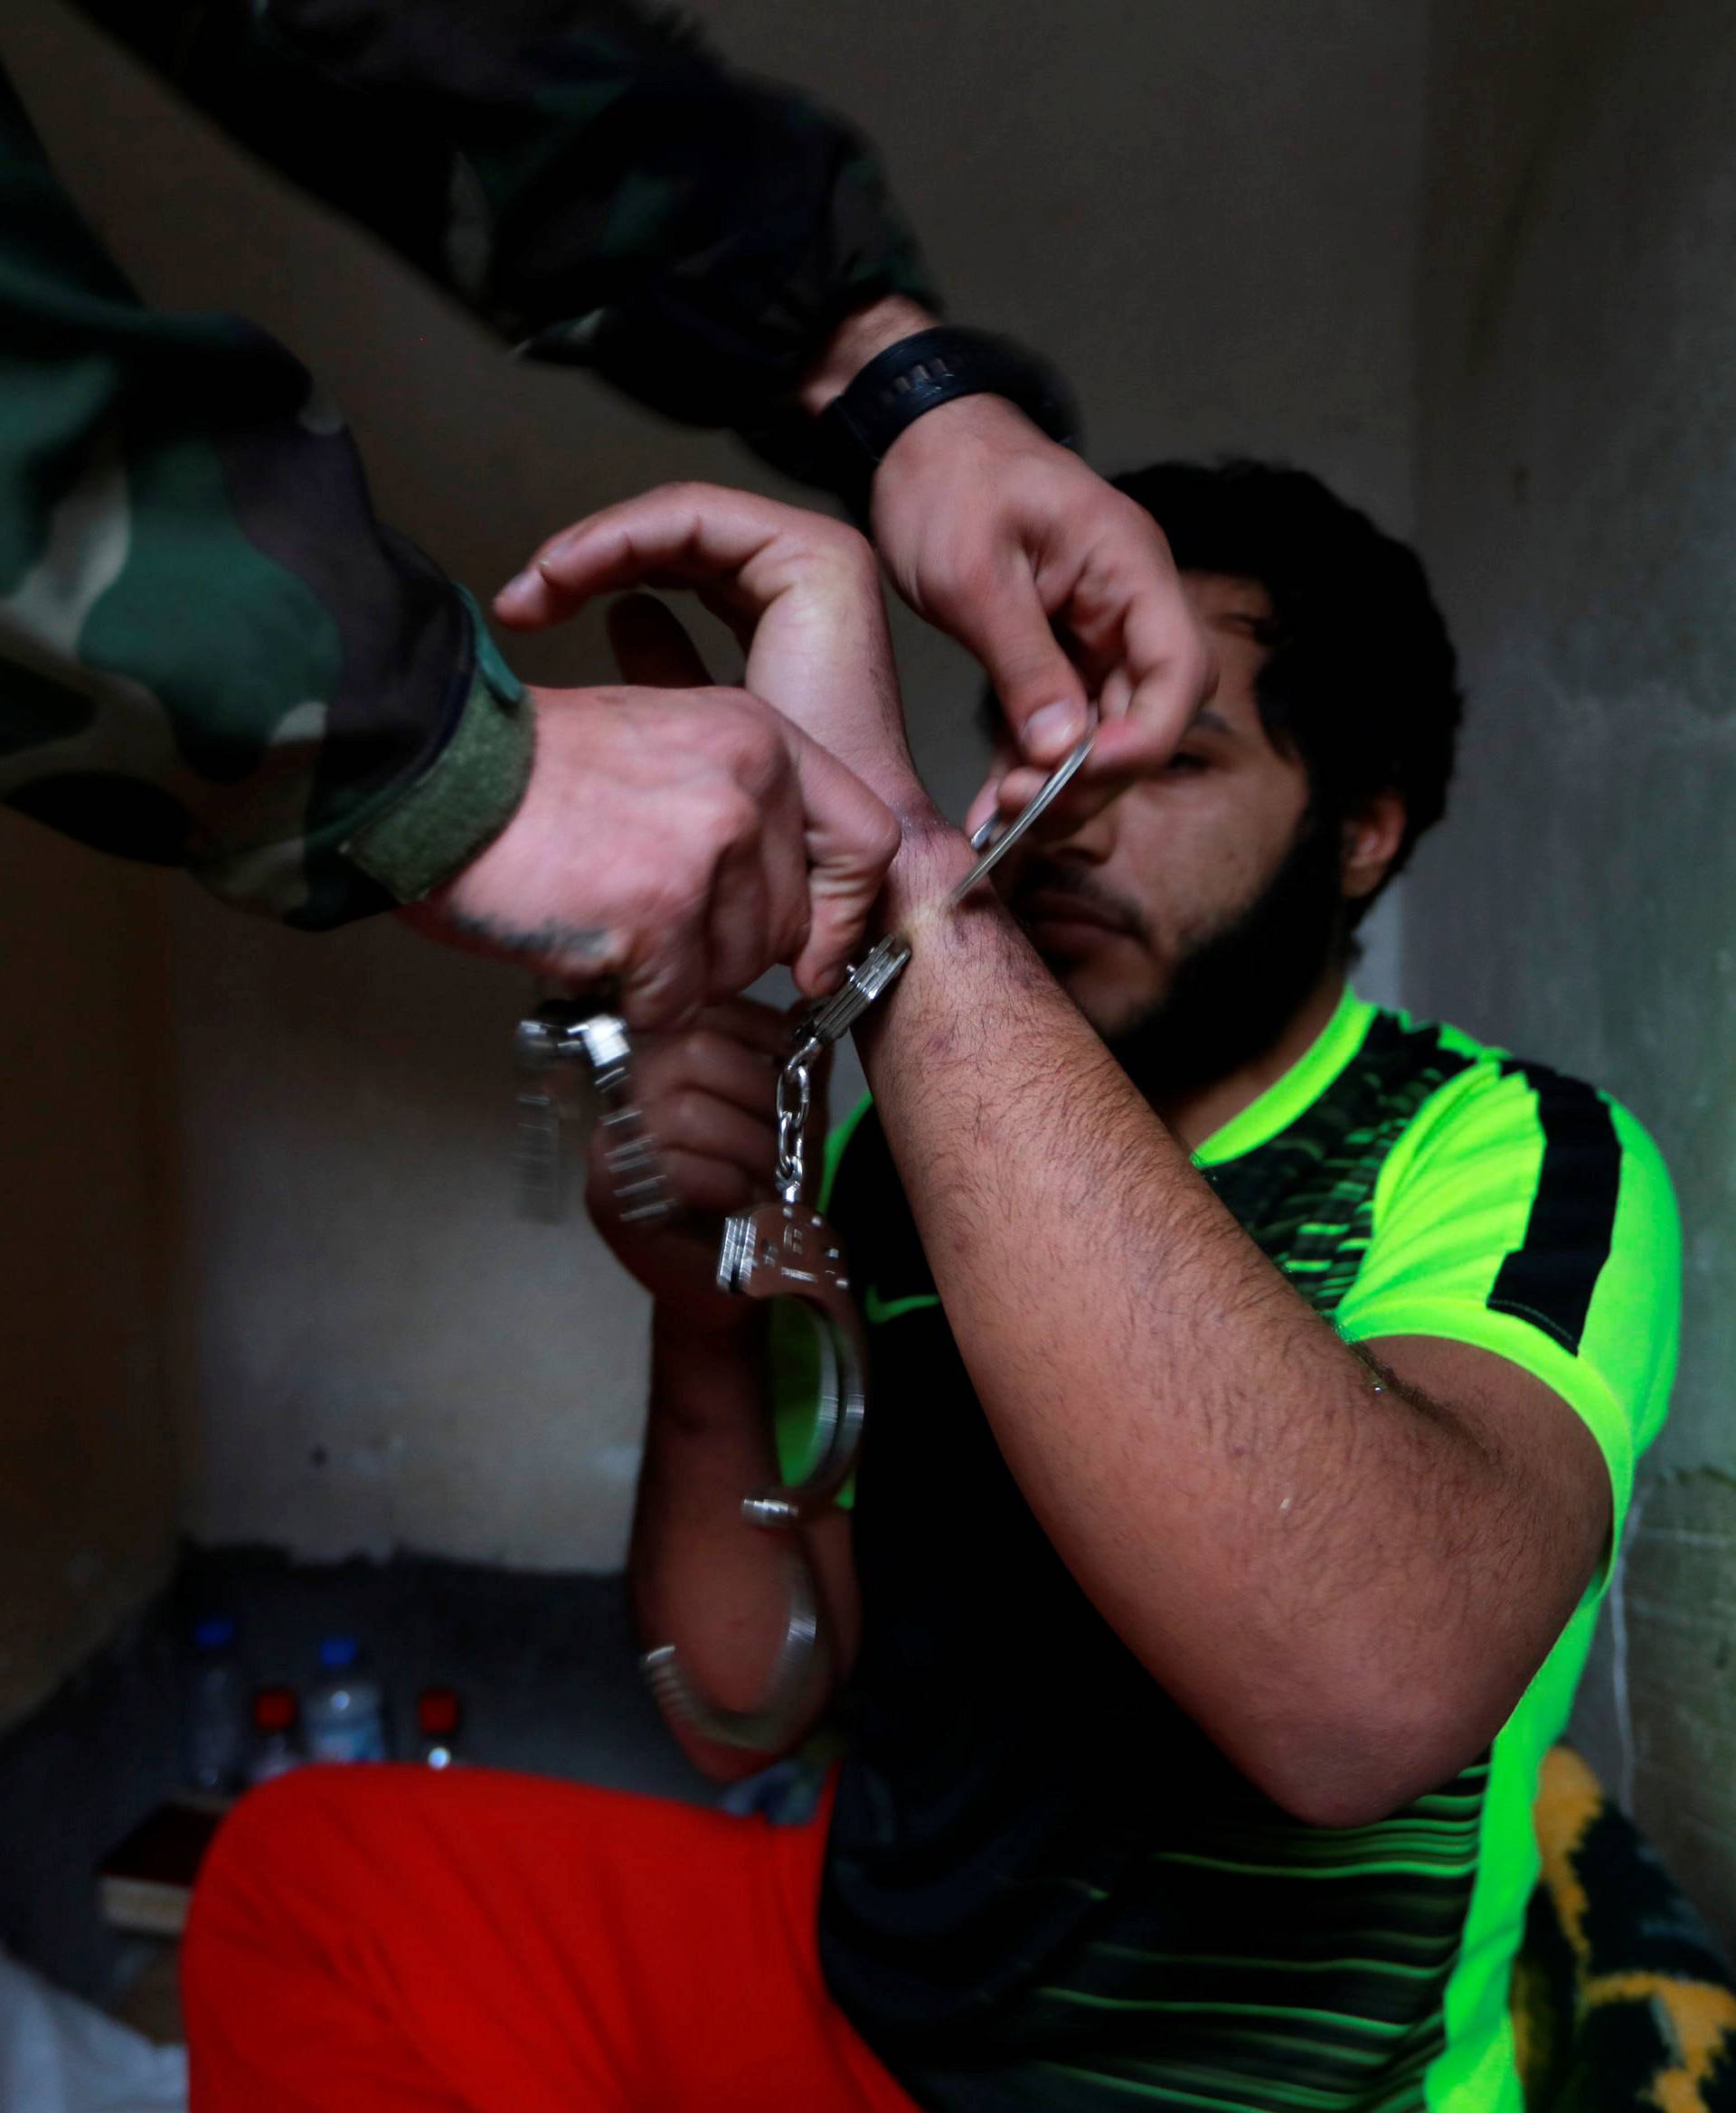 An Islamic State member has his cuff removed by a counter-terrorism agent inside his prison cell  in Sulaimaniya